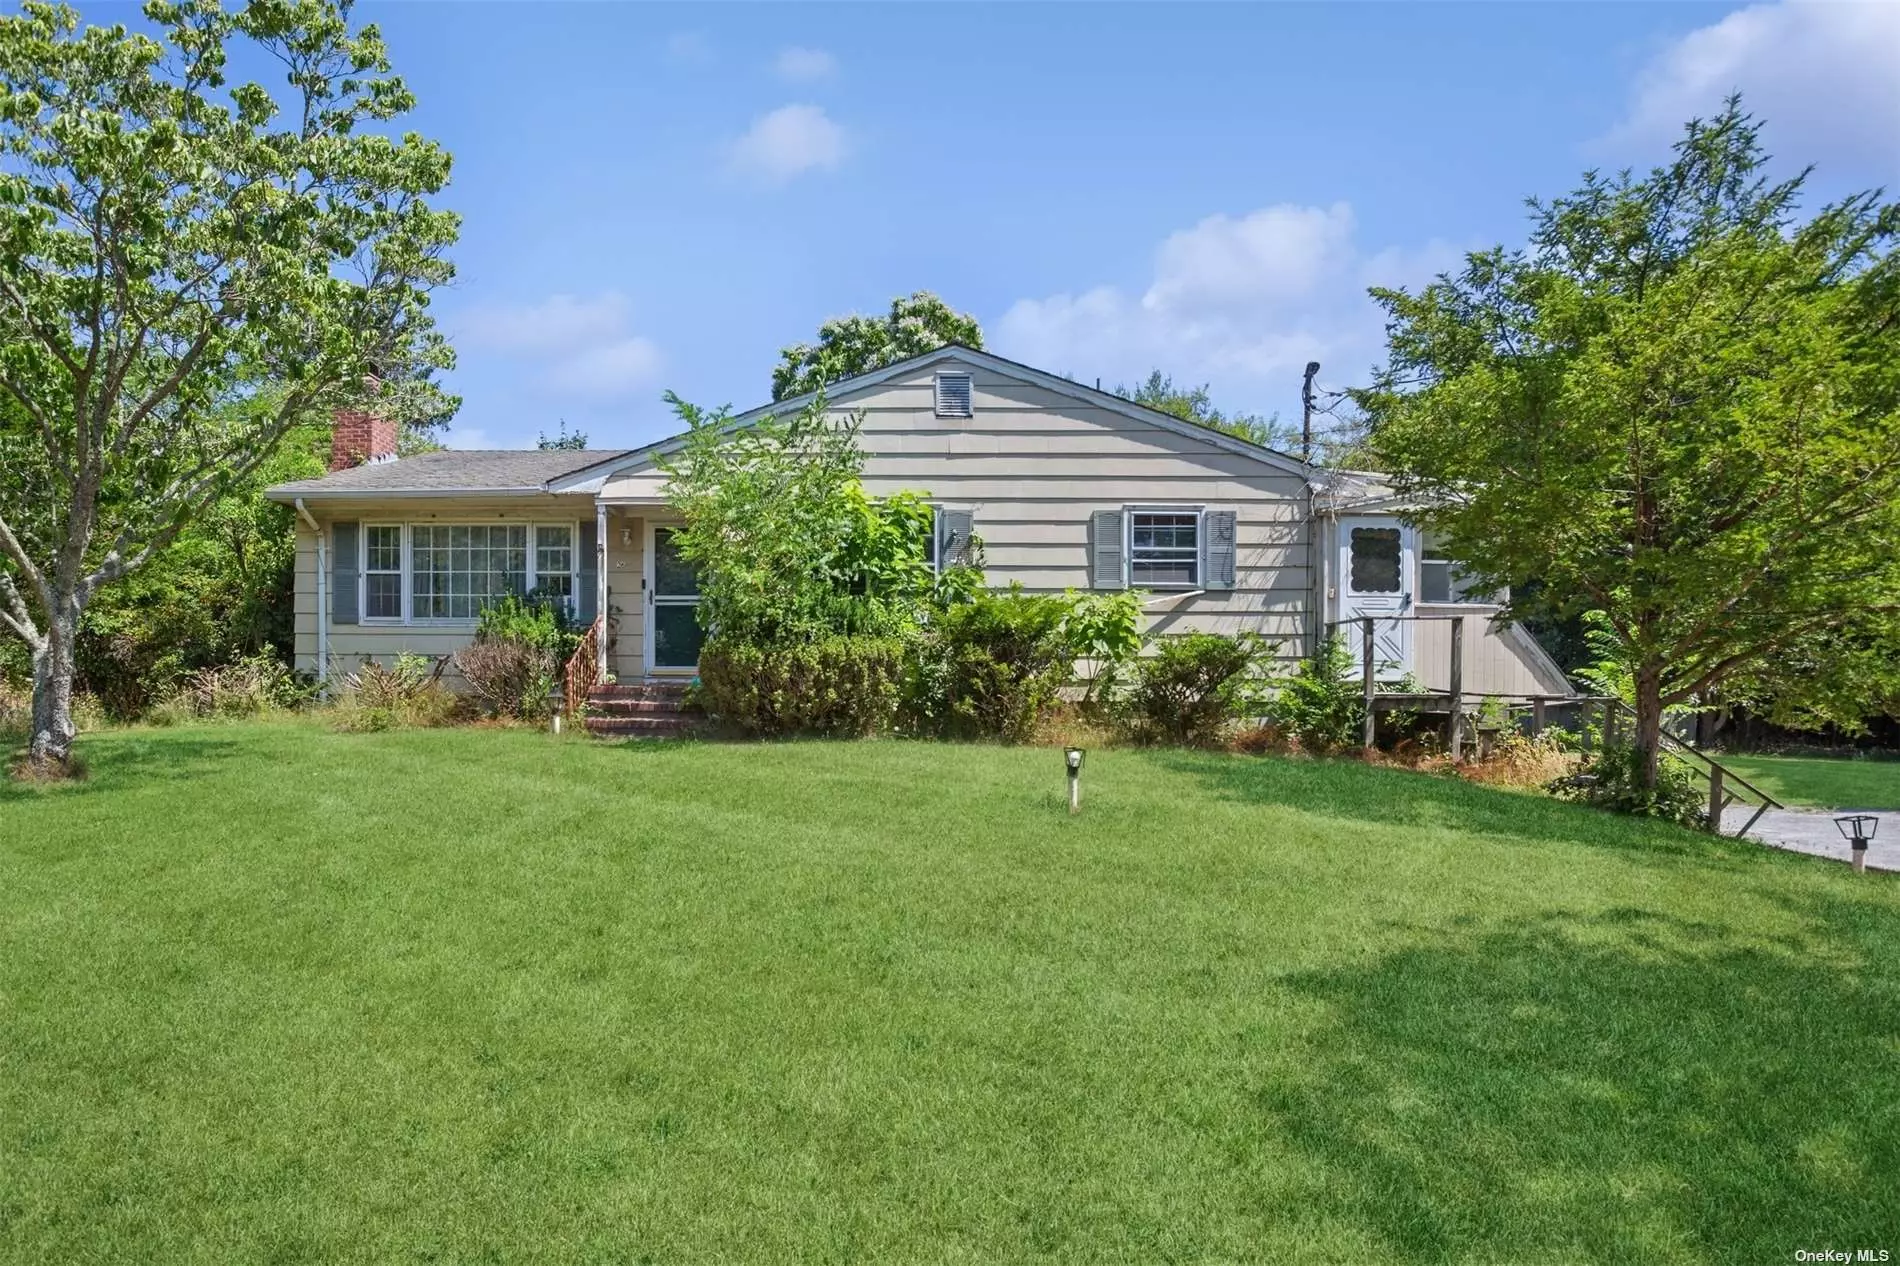 Opportunity knocks in Westhampton. Established three bedroom and two bath family home with fireplace, partially finished basement, two car garage and original pool is waiting for your creative touches. Conveniently located near shops, restaurants and the Village of Westhampton Beach